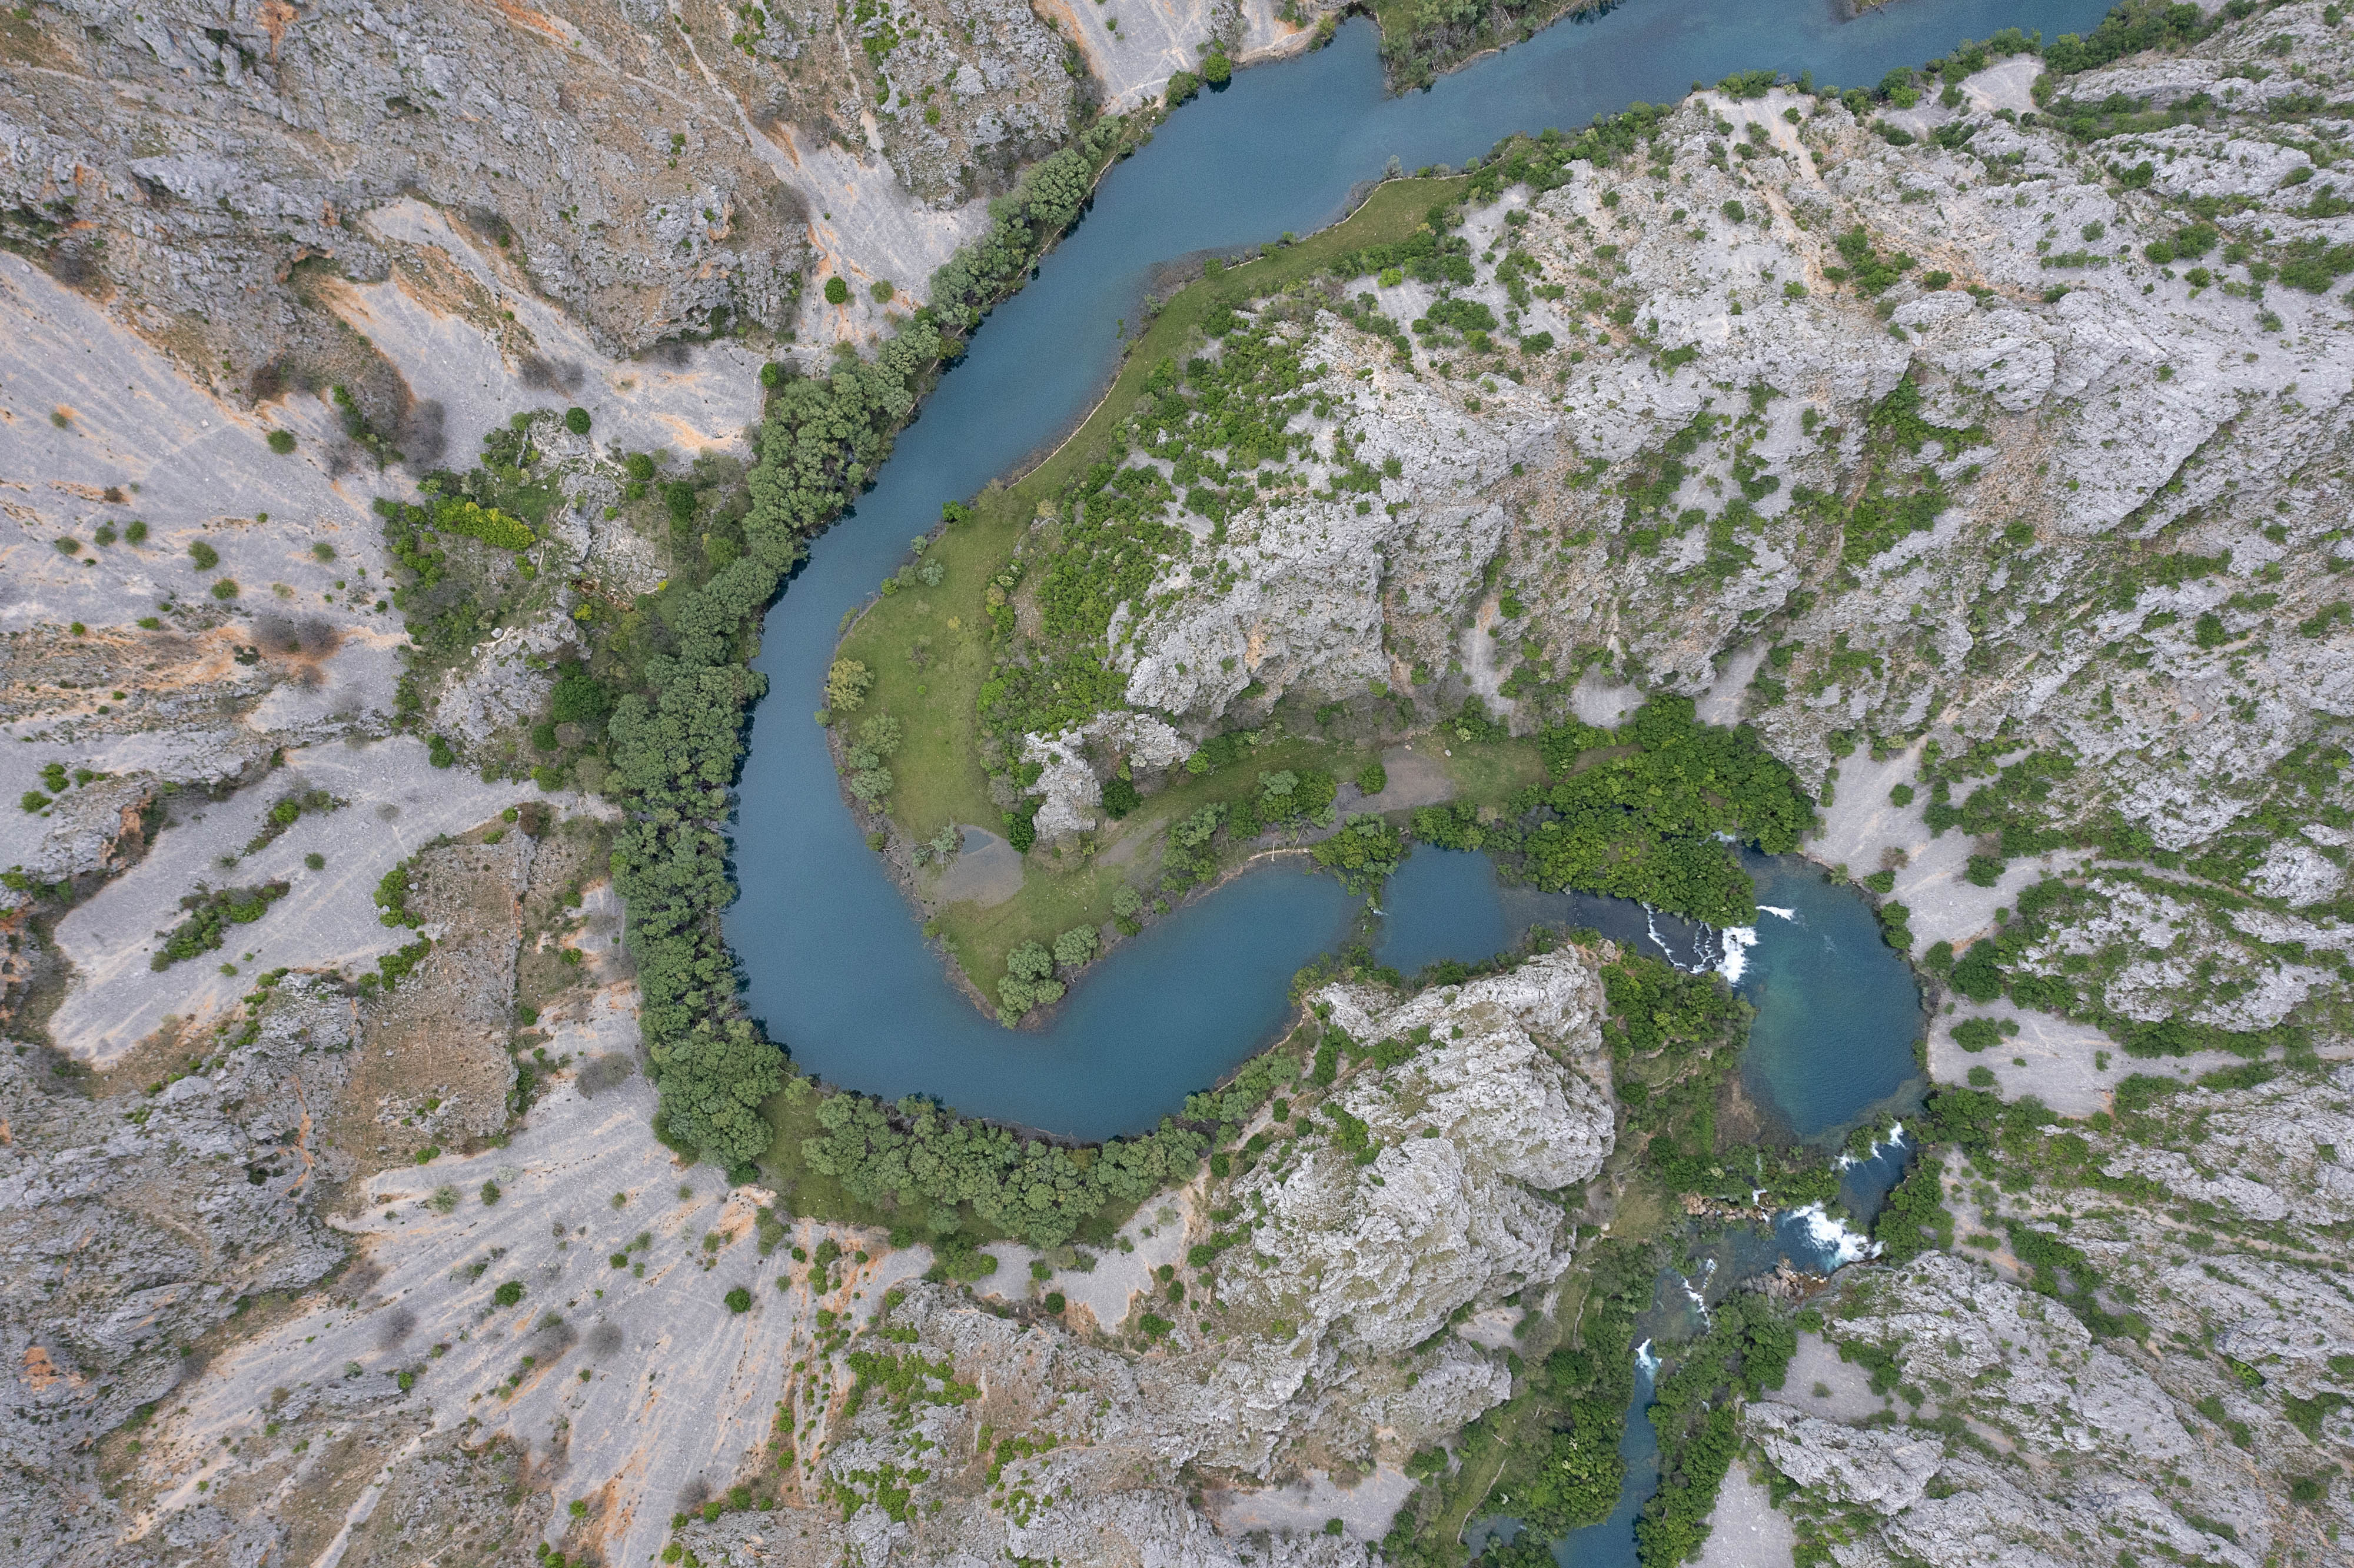 An aerial view of a river shows it following a bend.